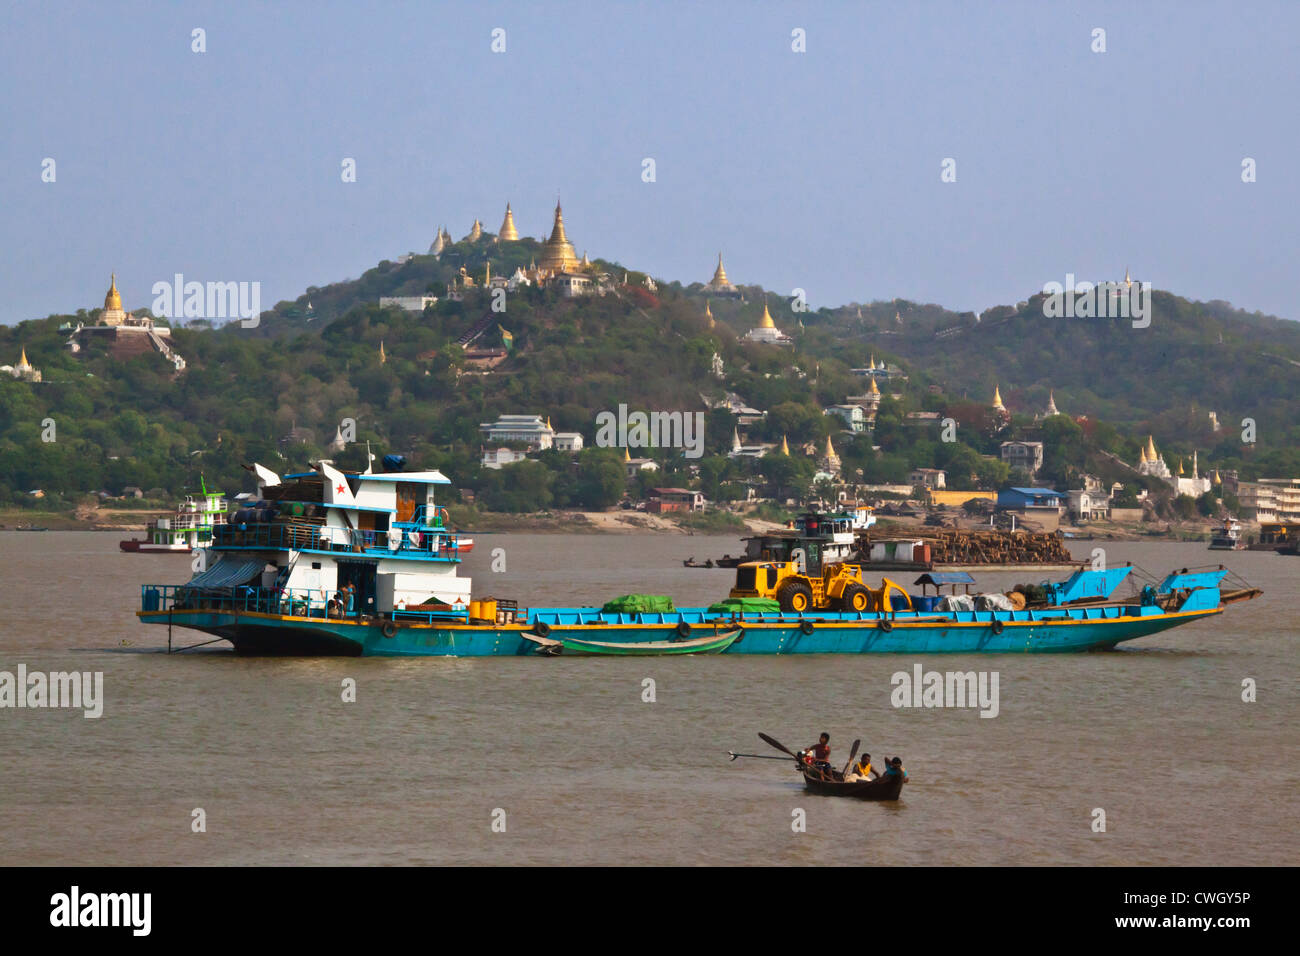 Boat traffic on the IRRAWADDY RIVER with SAGAING HILL behind - MANDALAY, MYANMAR Stock Photo